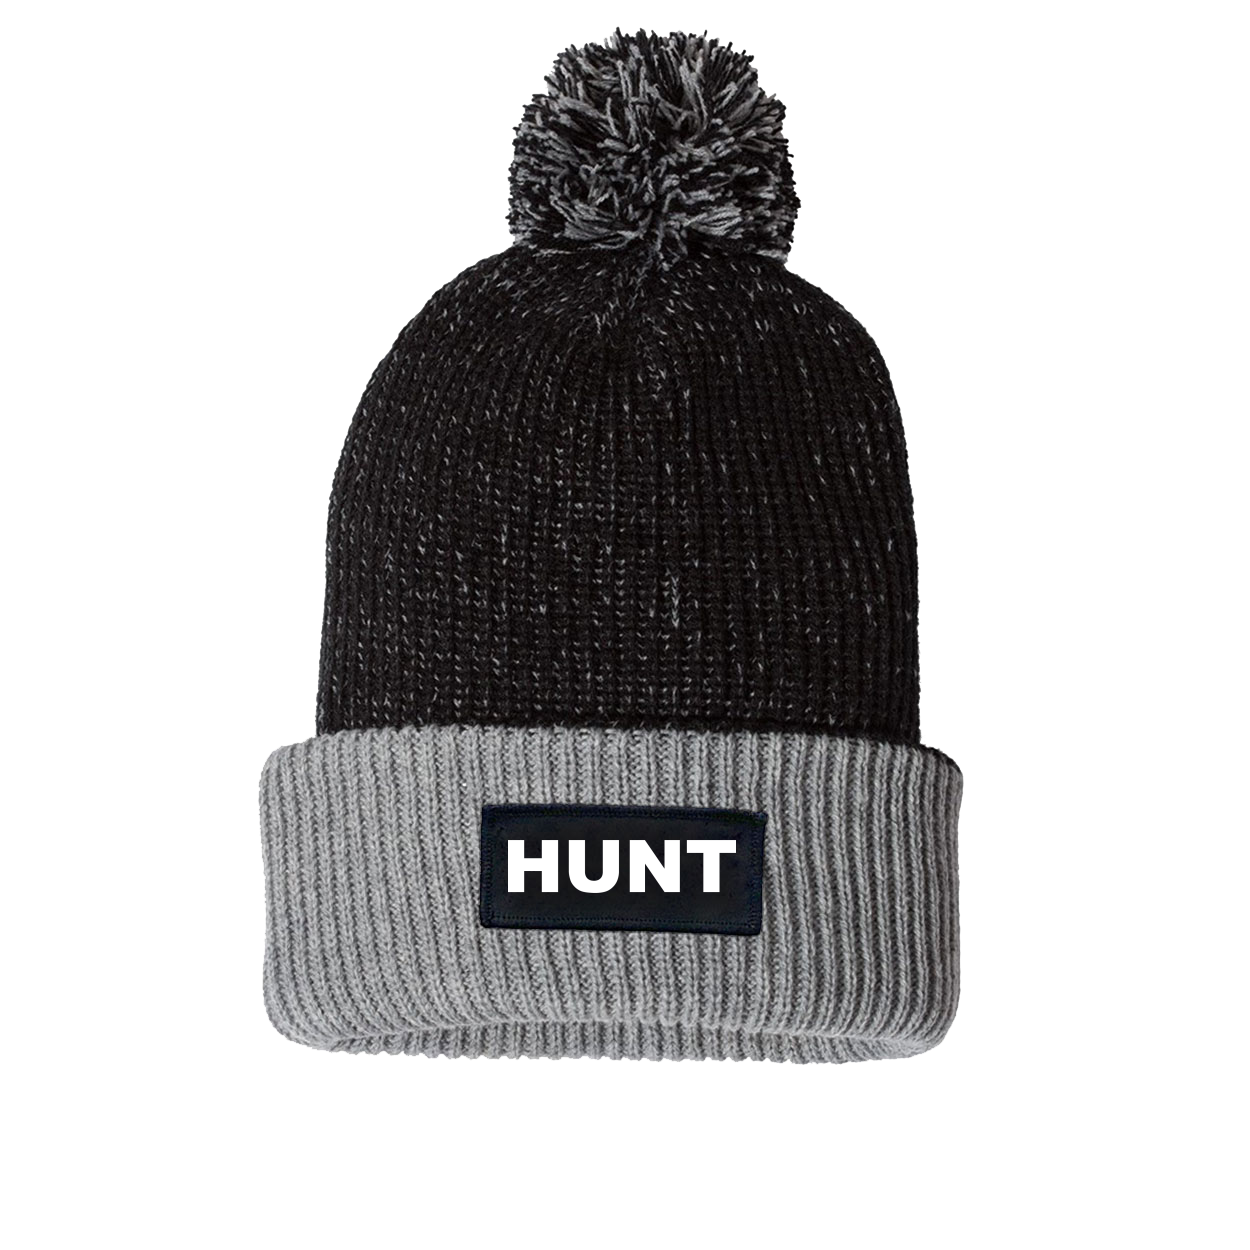 Hunt Brand Logo Night Out Woven Patch Roll Up Pom Knit Beanie Black/Gray